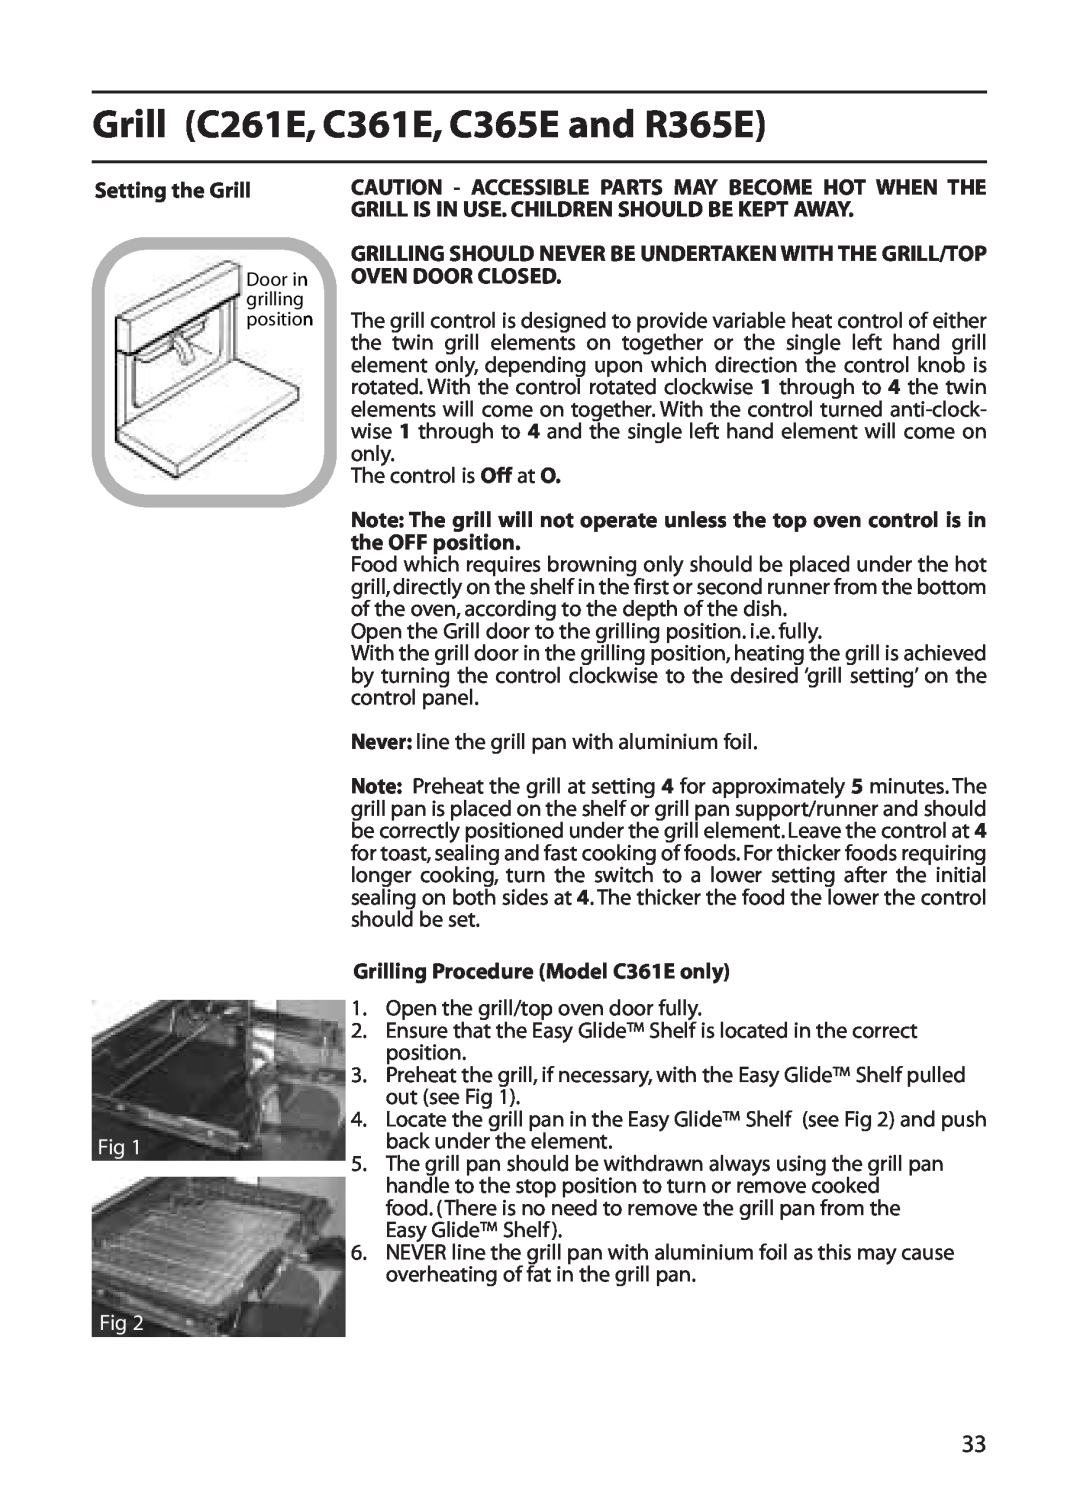 Creda C161E manual Grill C261E, C361E, C365E and R365E, Setting the Grill, Grilling Procedure Model C361E only 